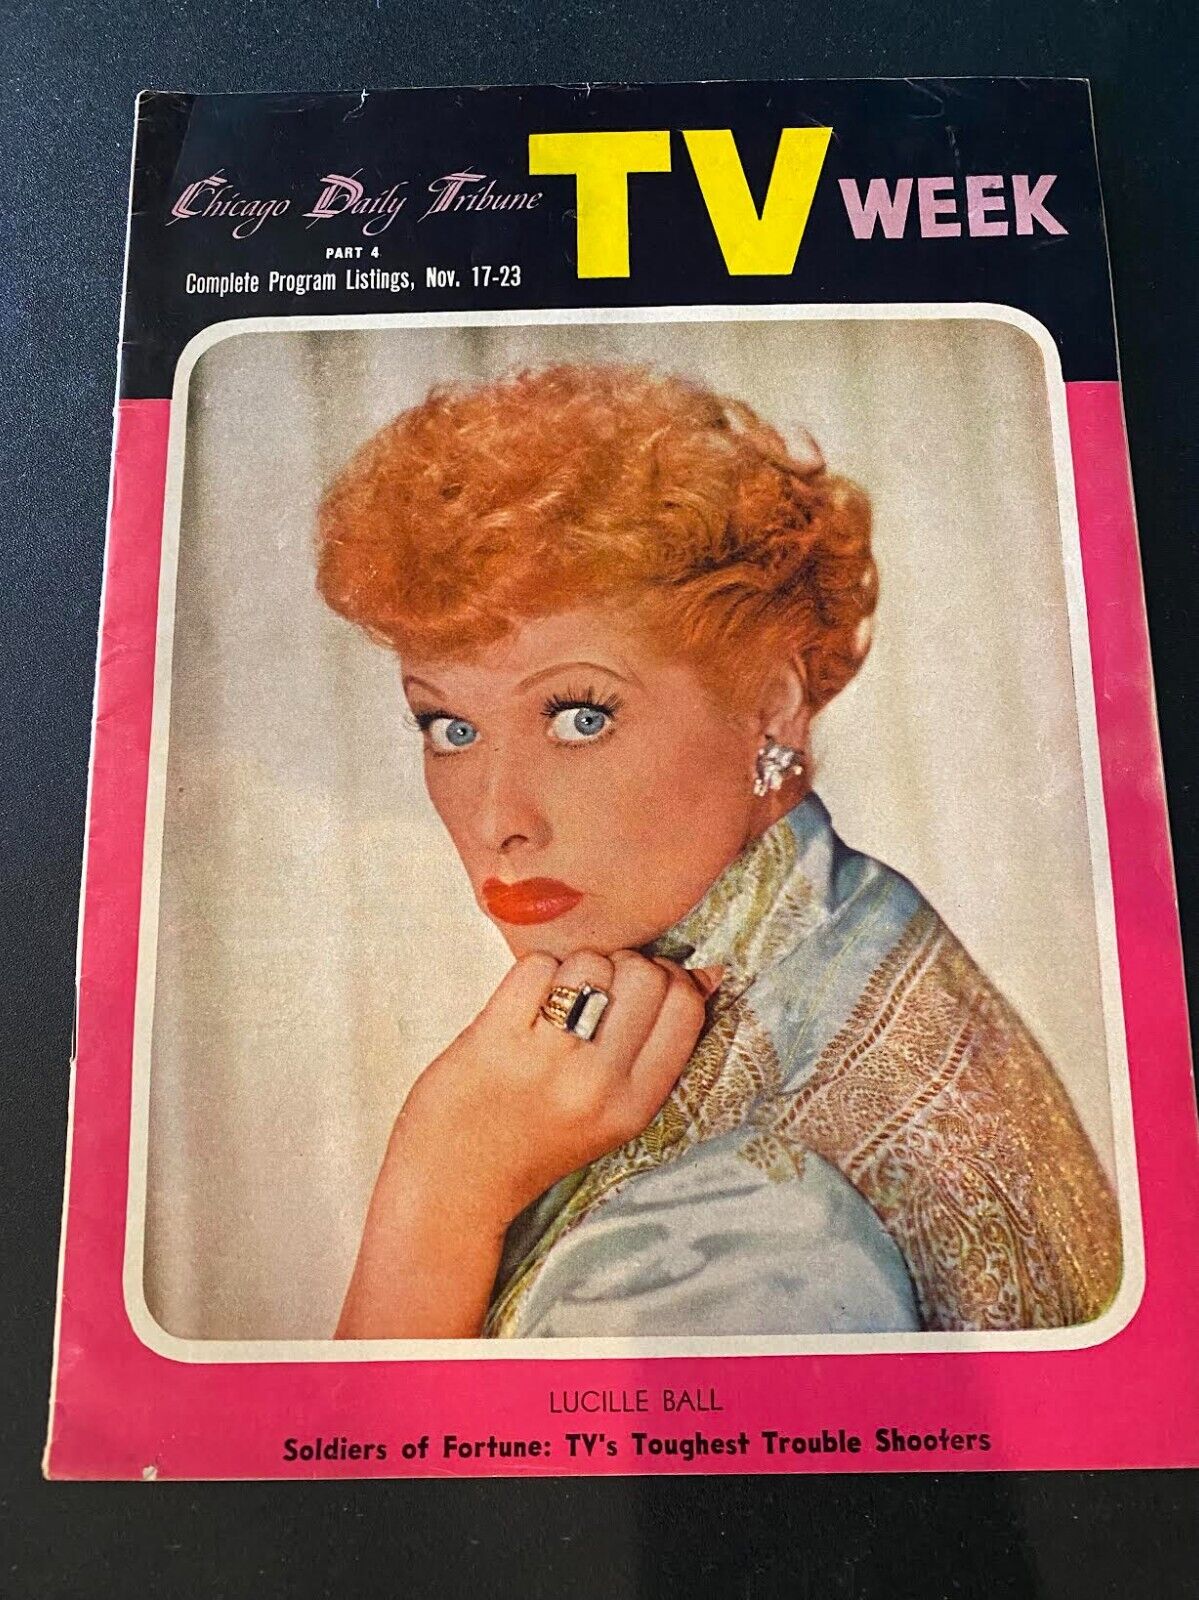 Chicago Daily Tribune TV Week NEWSPAPER 11/1956 LUCILLE BALL COVER